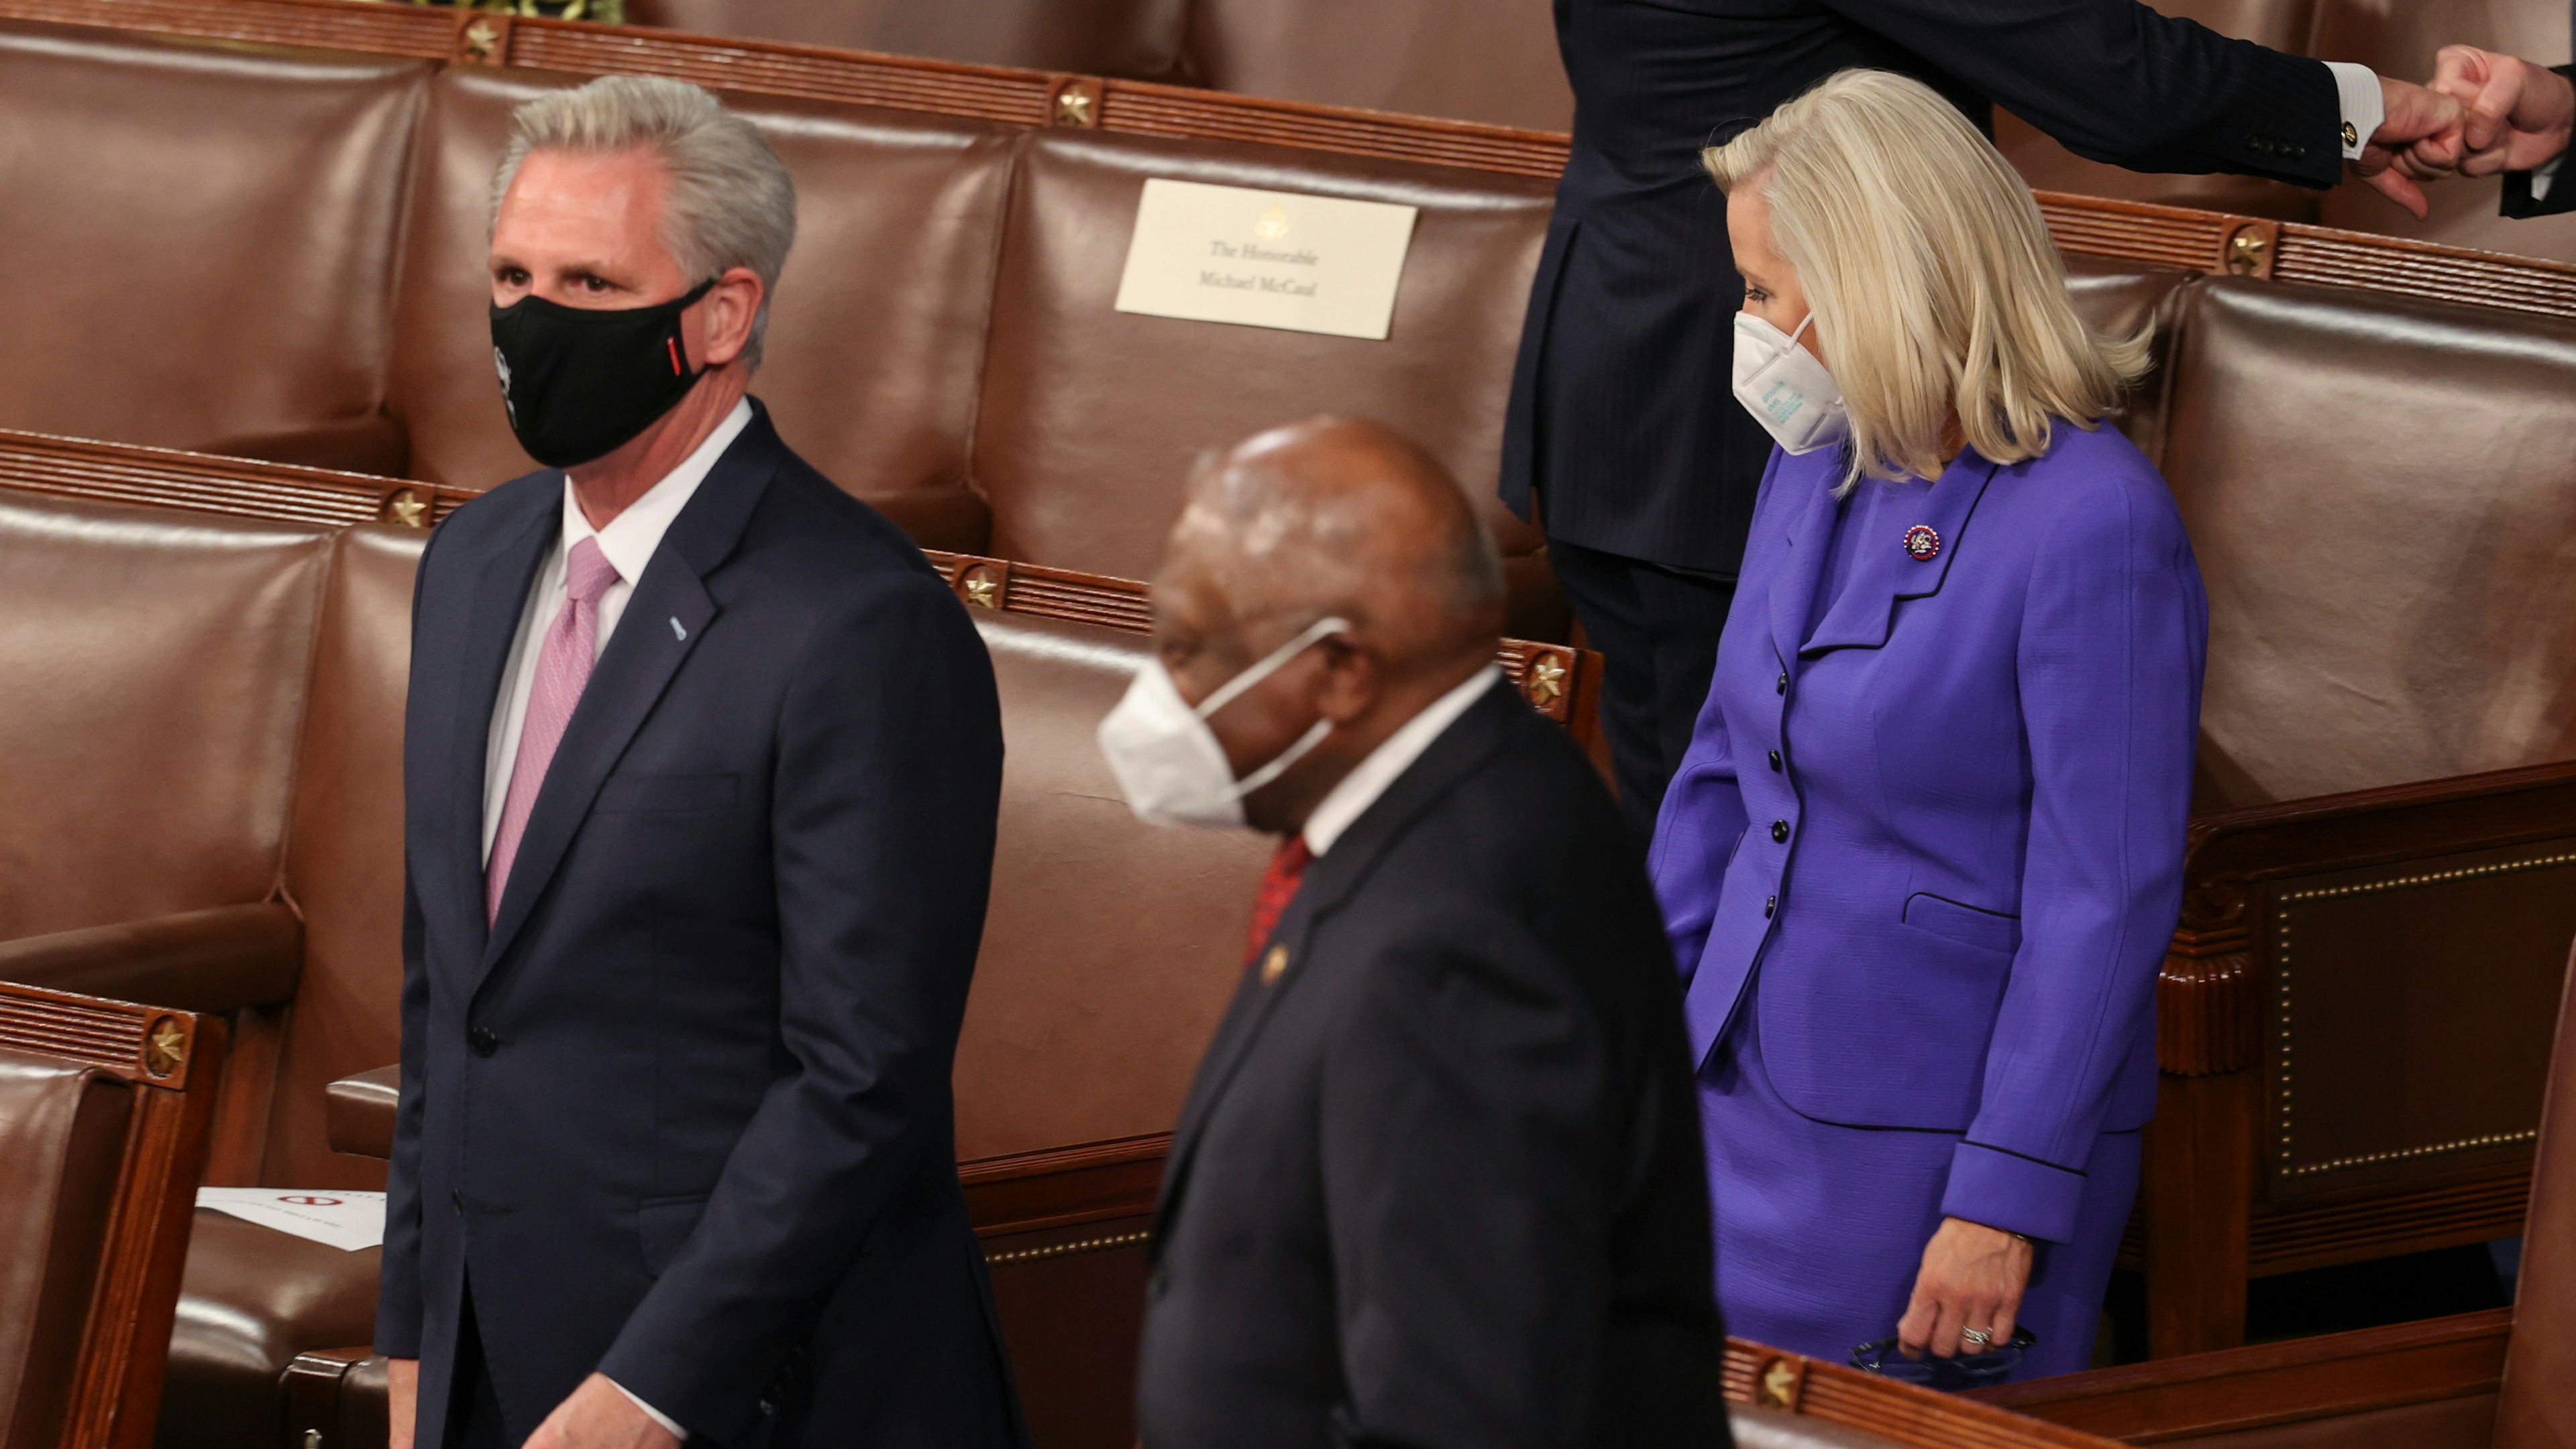 U.S. House Minority Leader Kevin McCarthy (R-CA) and House Republican Conference Chairperson Rep. Liz Cheney (R-WY) pass Rep. James Clyburn (D-SC) as they arrive to attend U.S. President Joe Biden address